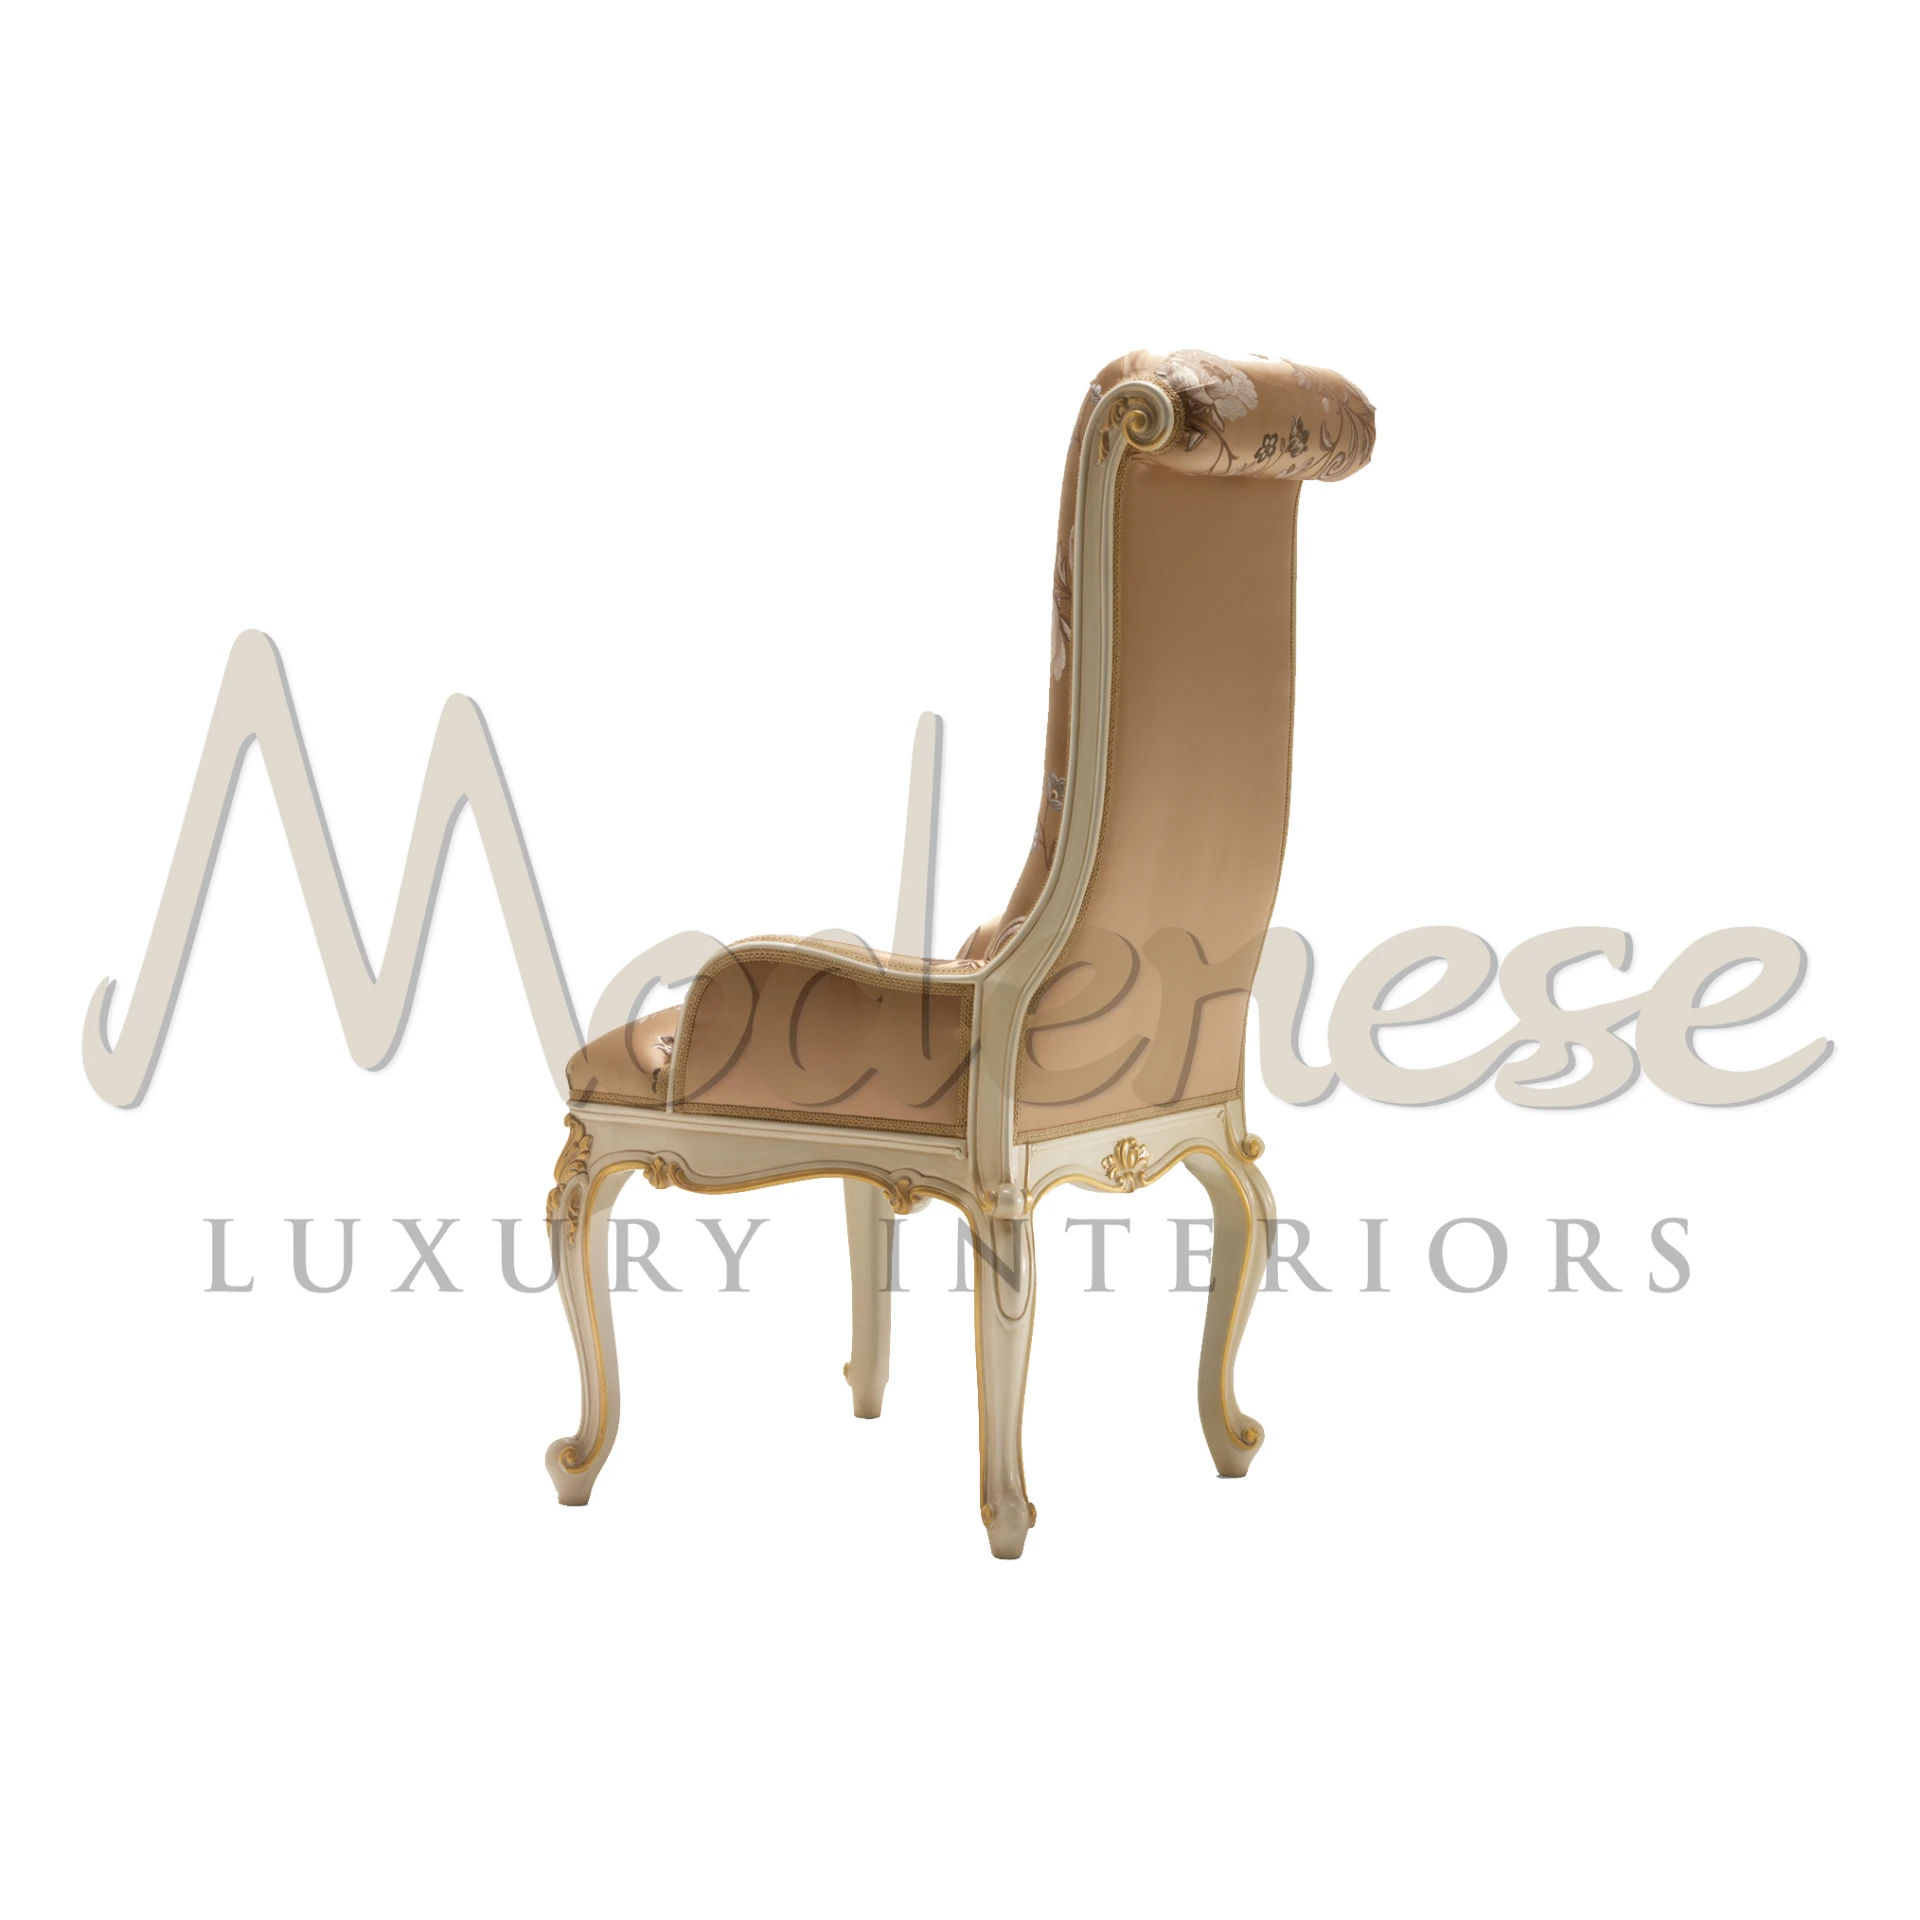 Fancy hand carved chair with armrests, blending art and comfort.